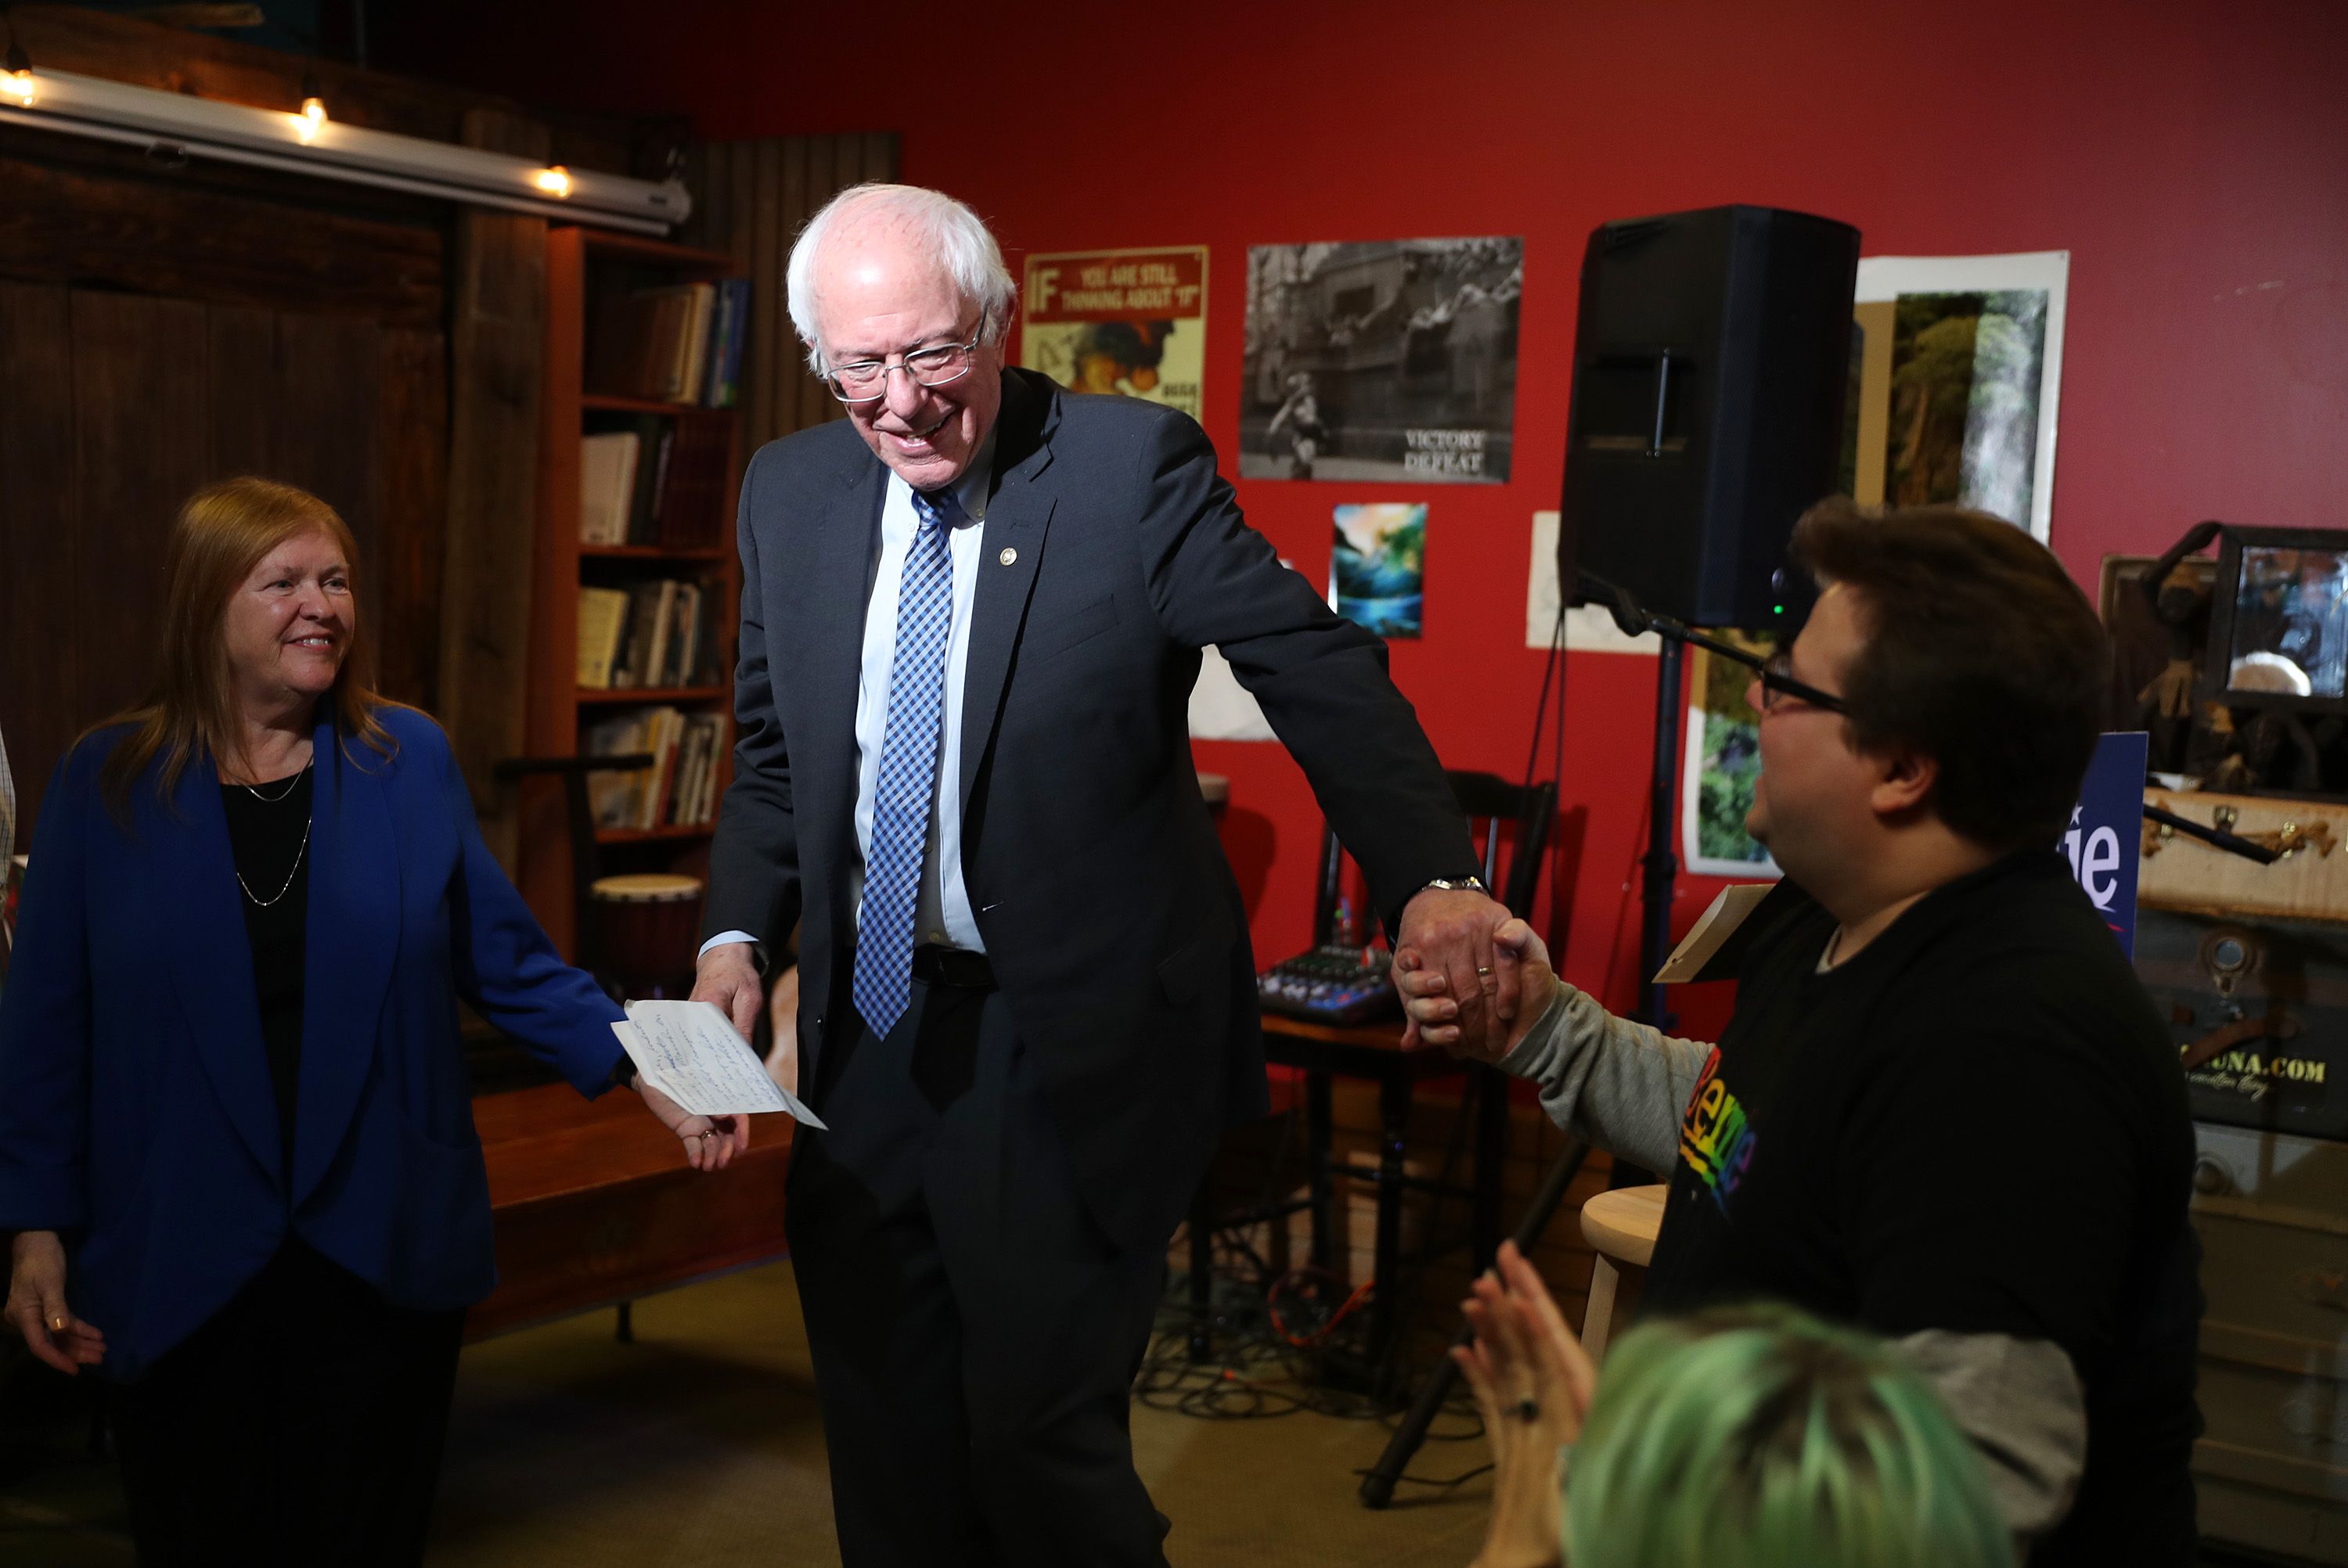 Sen. Bernie Sanders (I-VT) and his wife, Jane Sanders, greet people during a campaign stop at the Big Kahunas Cafe & Grill on February 08, 2020 in Merrimack, New Hampshire.